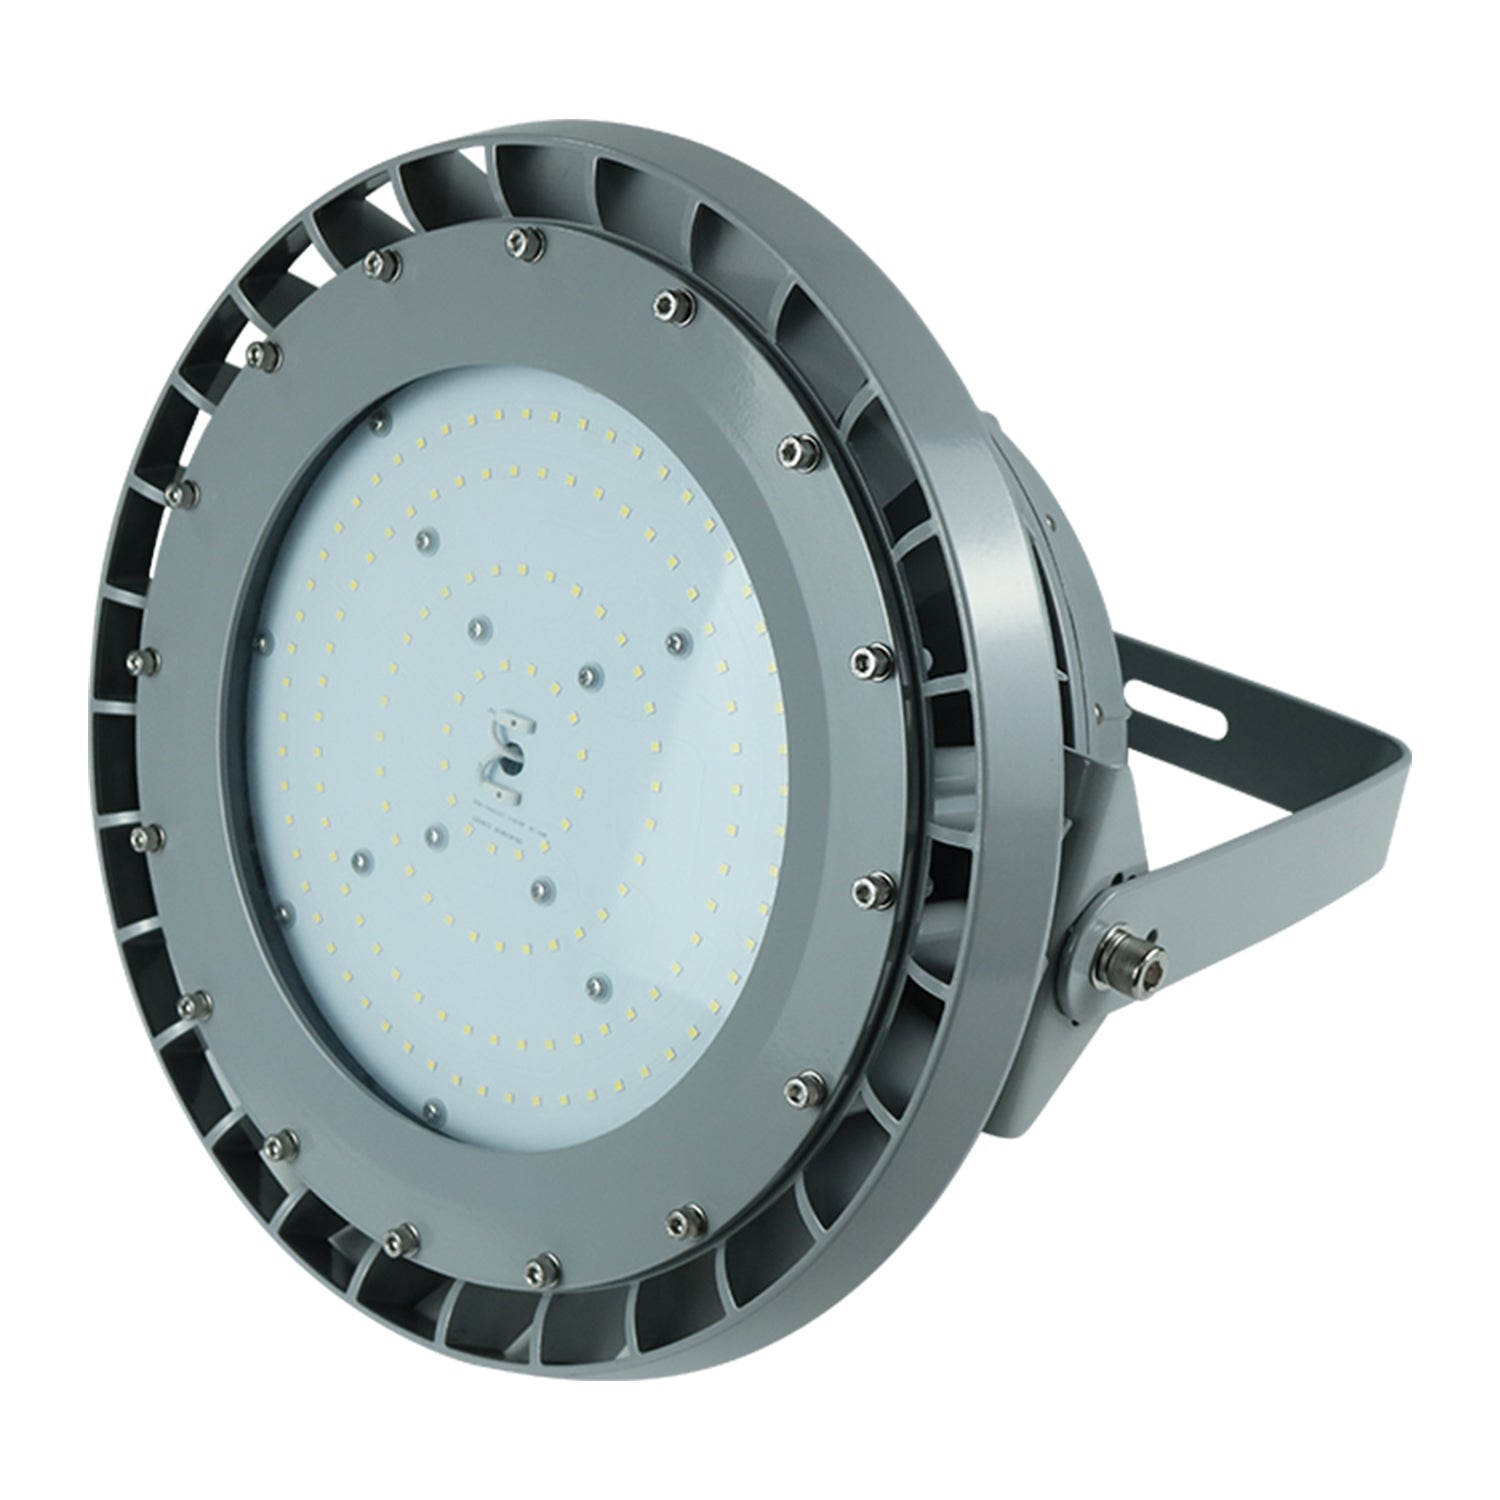 B Series 100W LED Explosion Proof Round High Bay Light - Non Dimmable, 5000K, 13500LM, IP66 Rated for Hazardous Locations